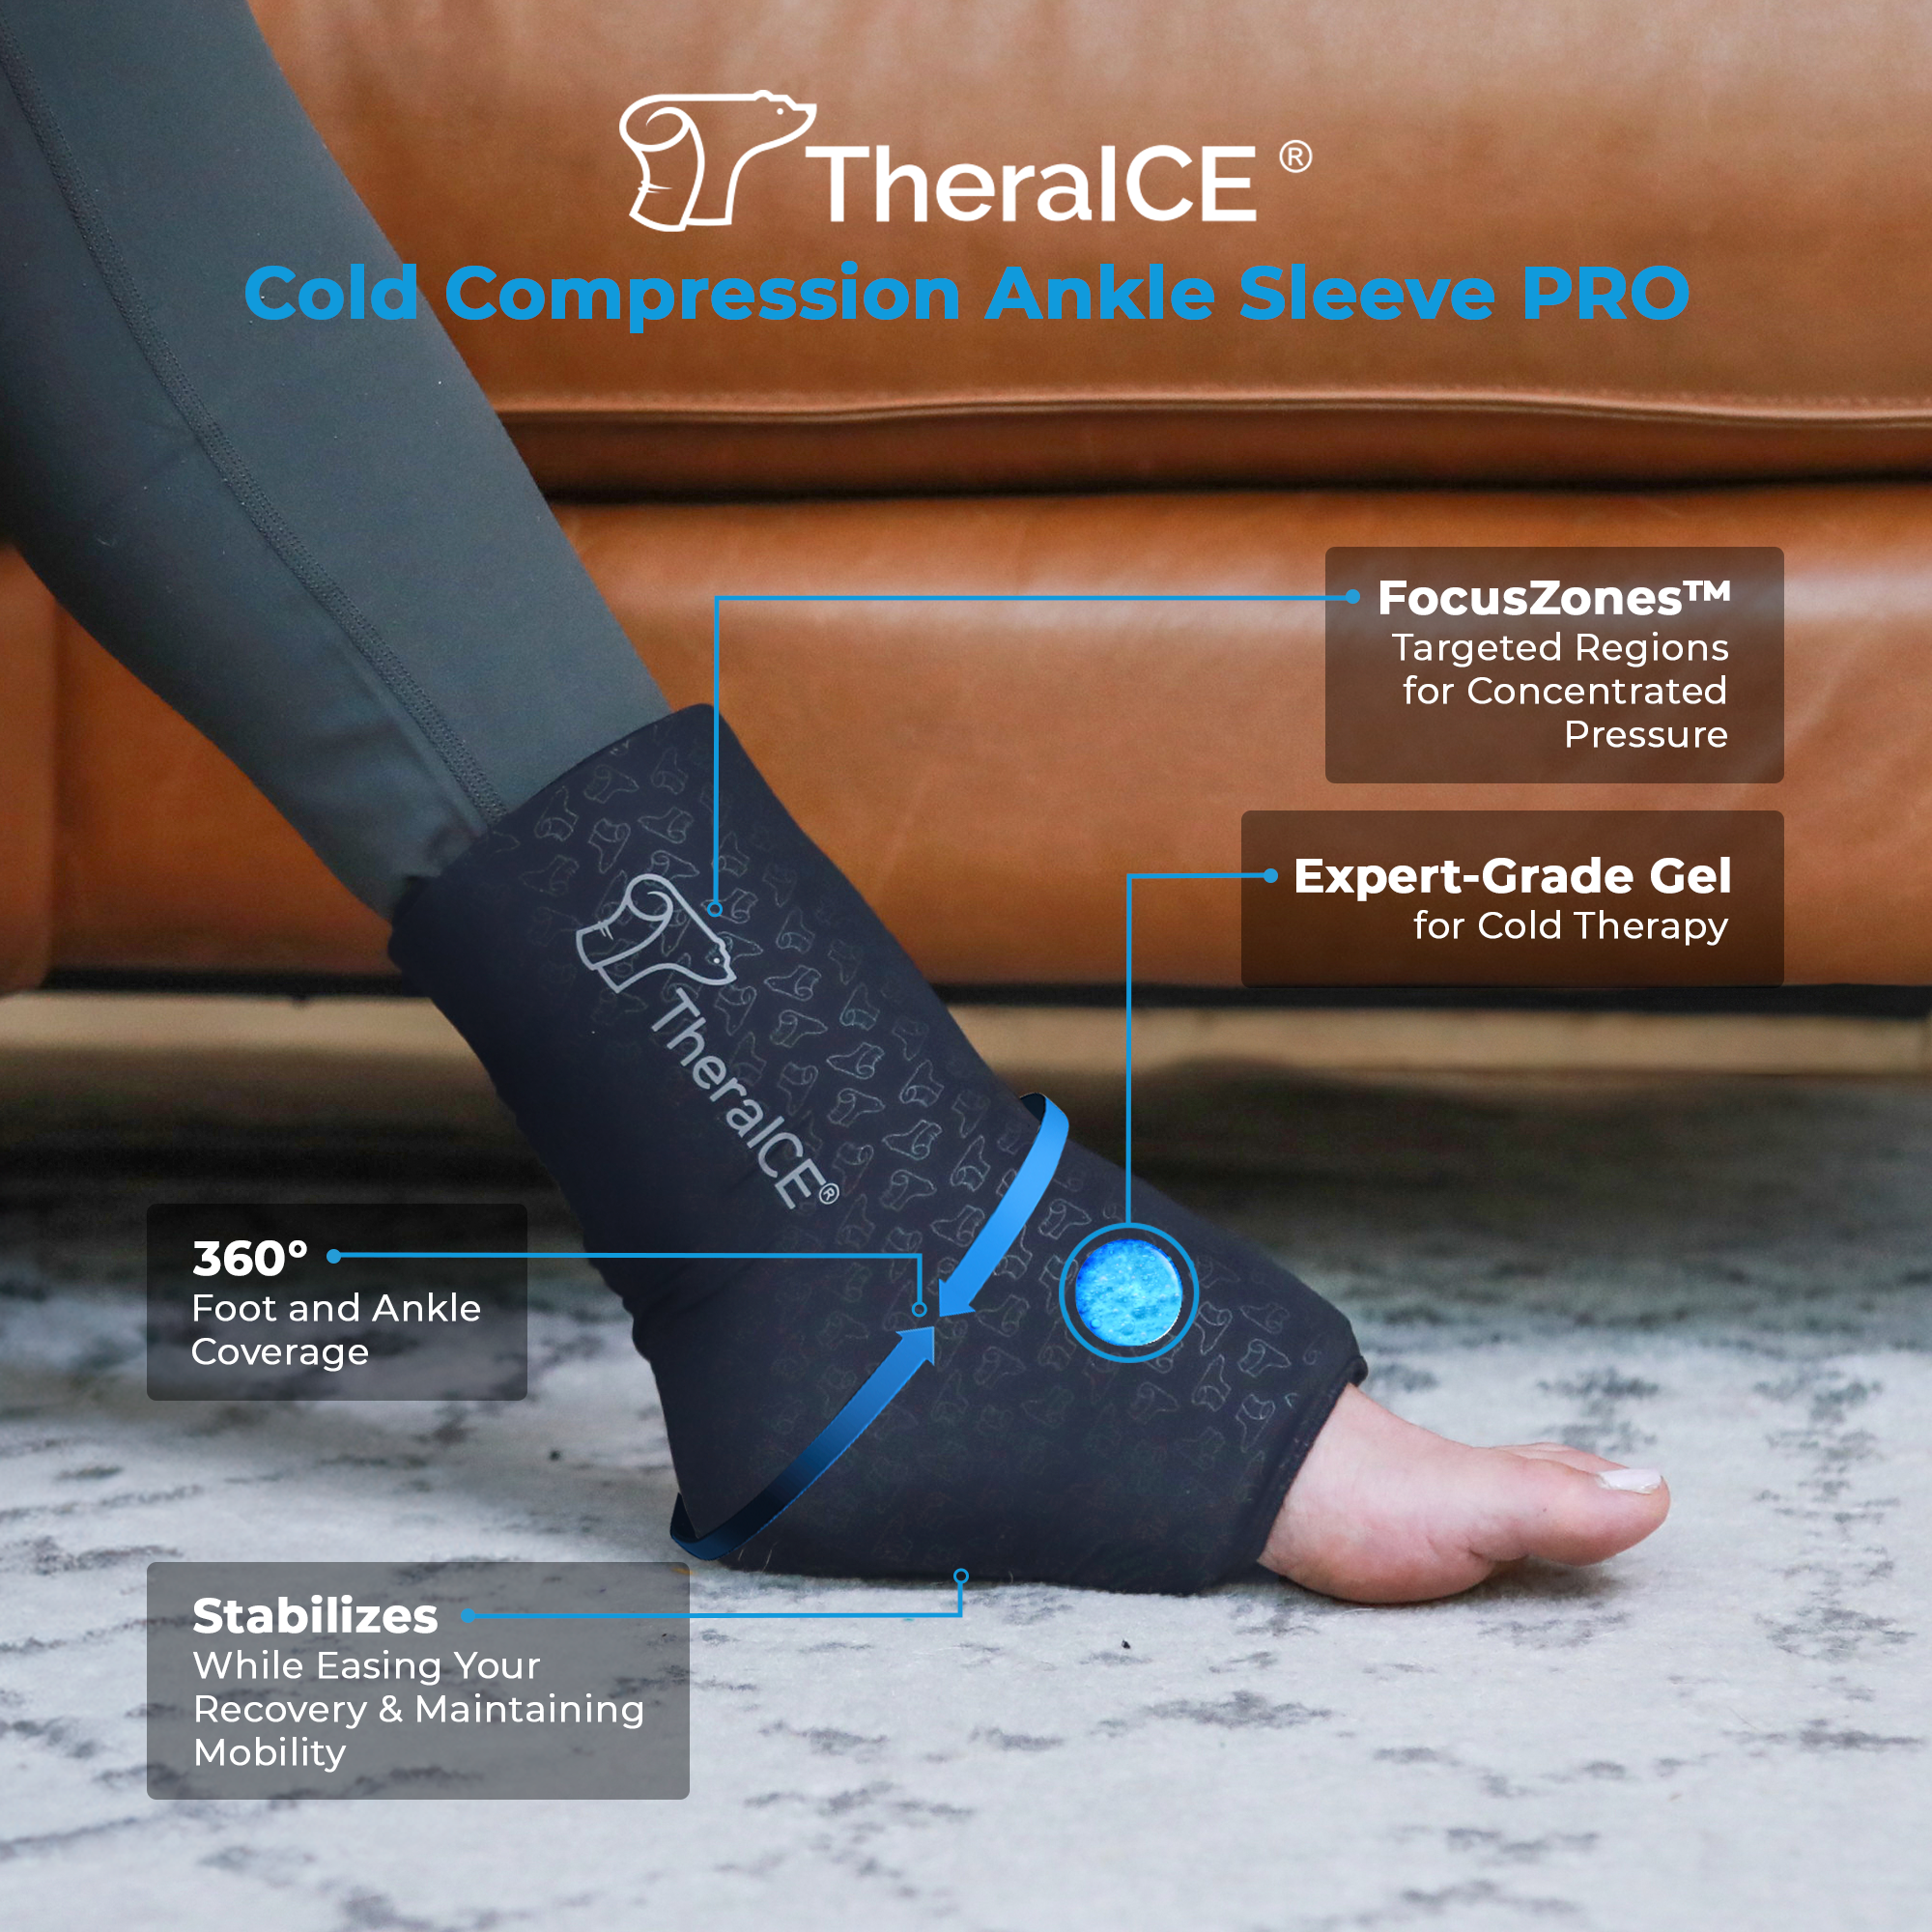 TheraICE Cold Compression Ankle Sleeve PRO